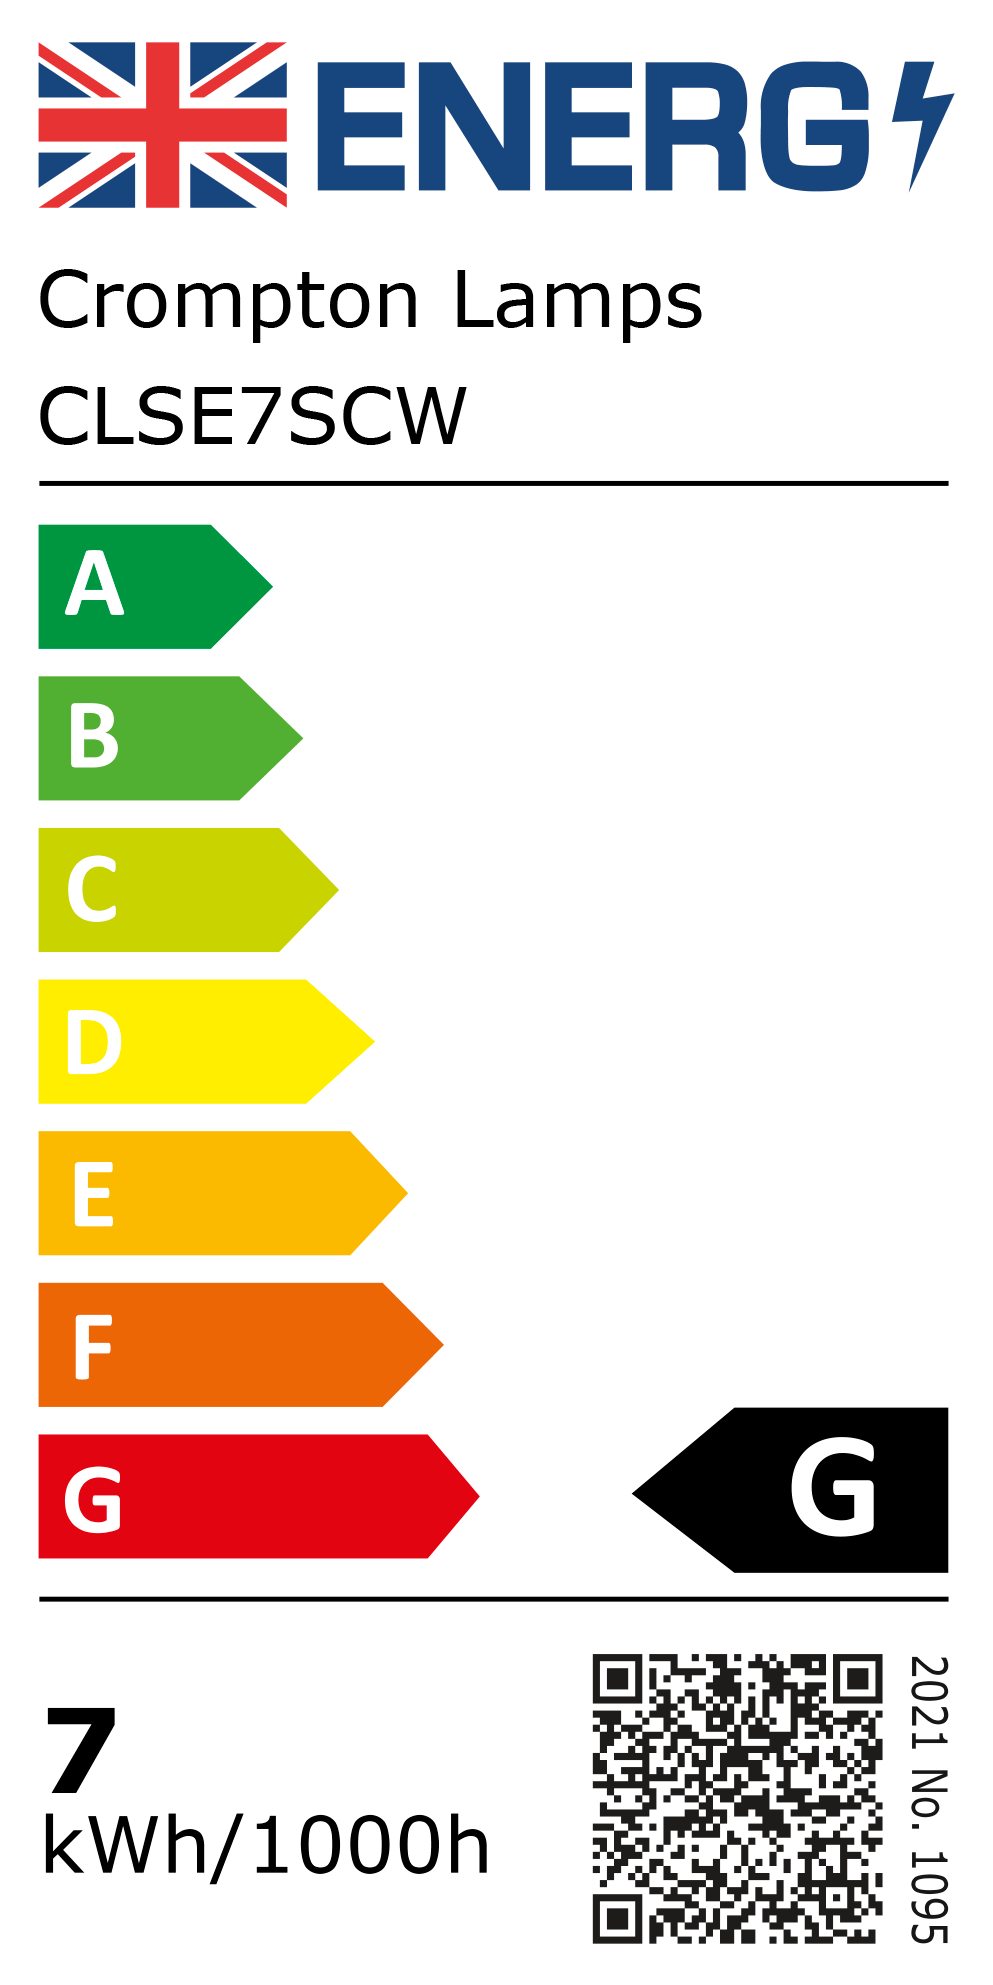 New 2021 Energy Rating Label: Stock Code CLSE7SCW